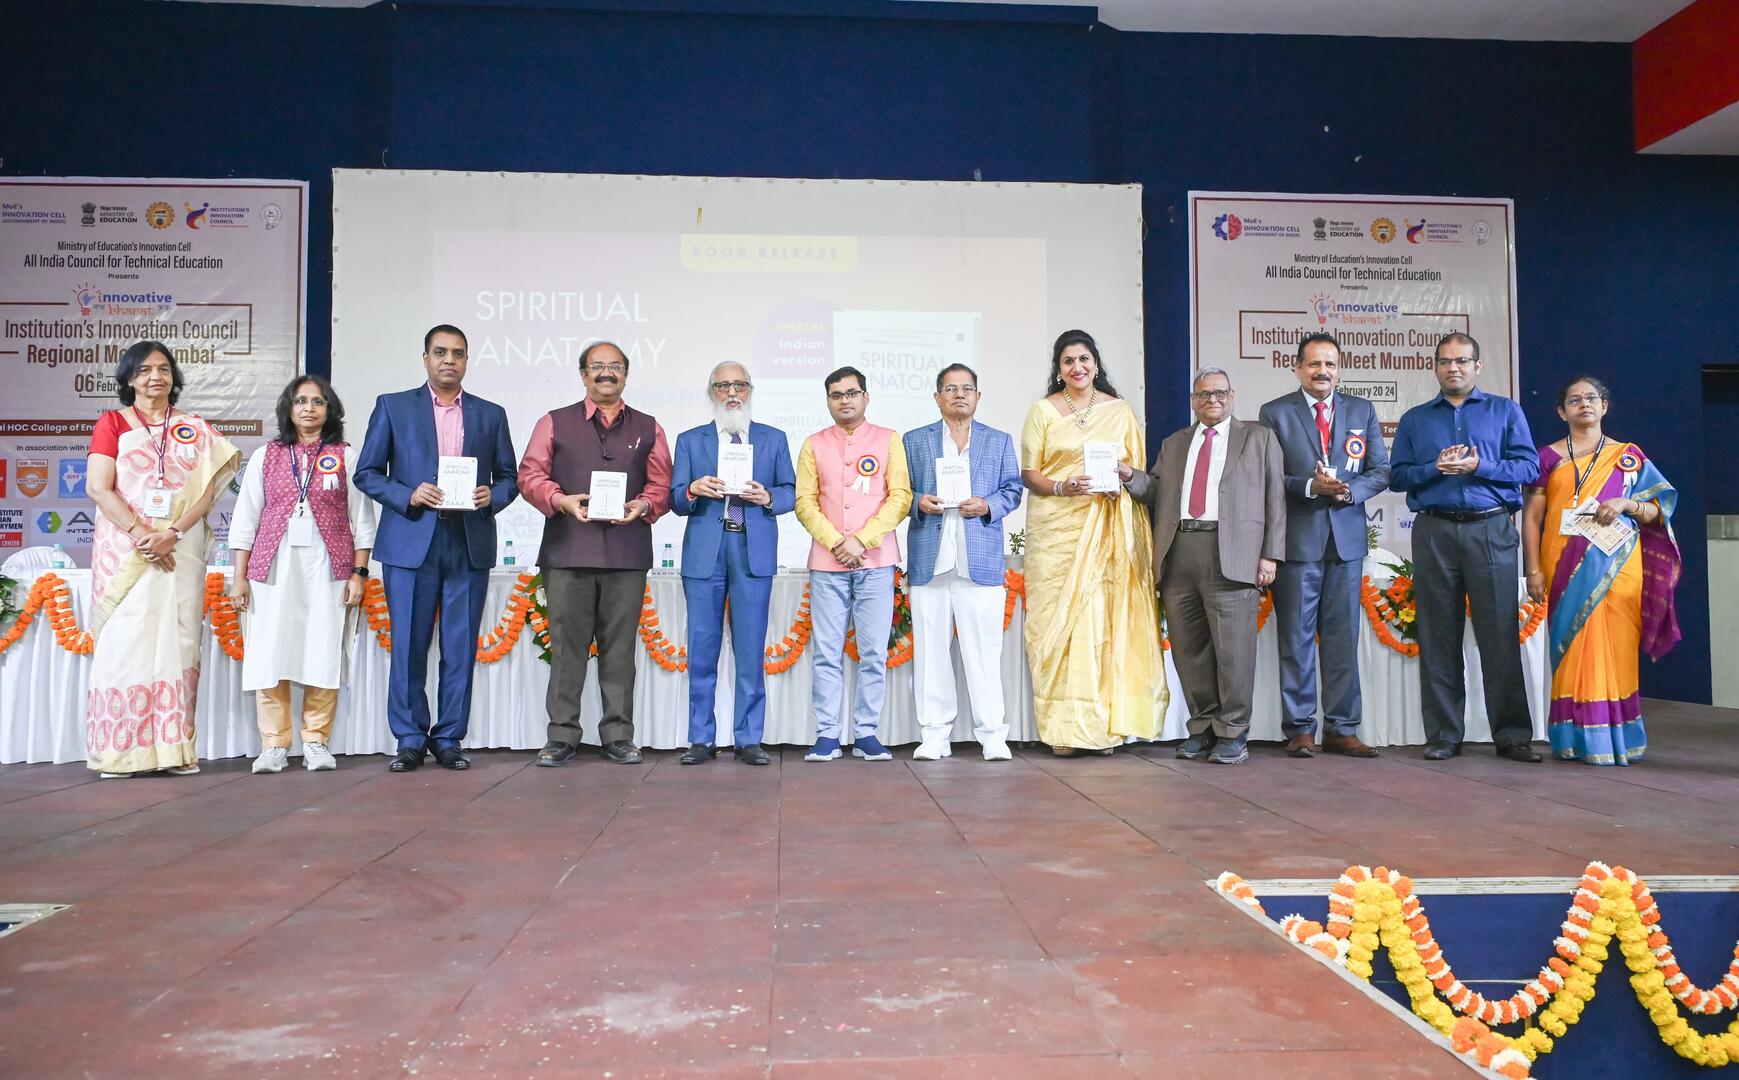 Institute Innovation Council’s Regional Meet held with a grand launch of the Indian edition of Spiritual Anatomy – the latest international bestseller by Daaji